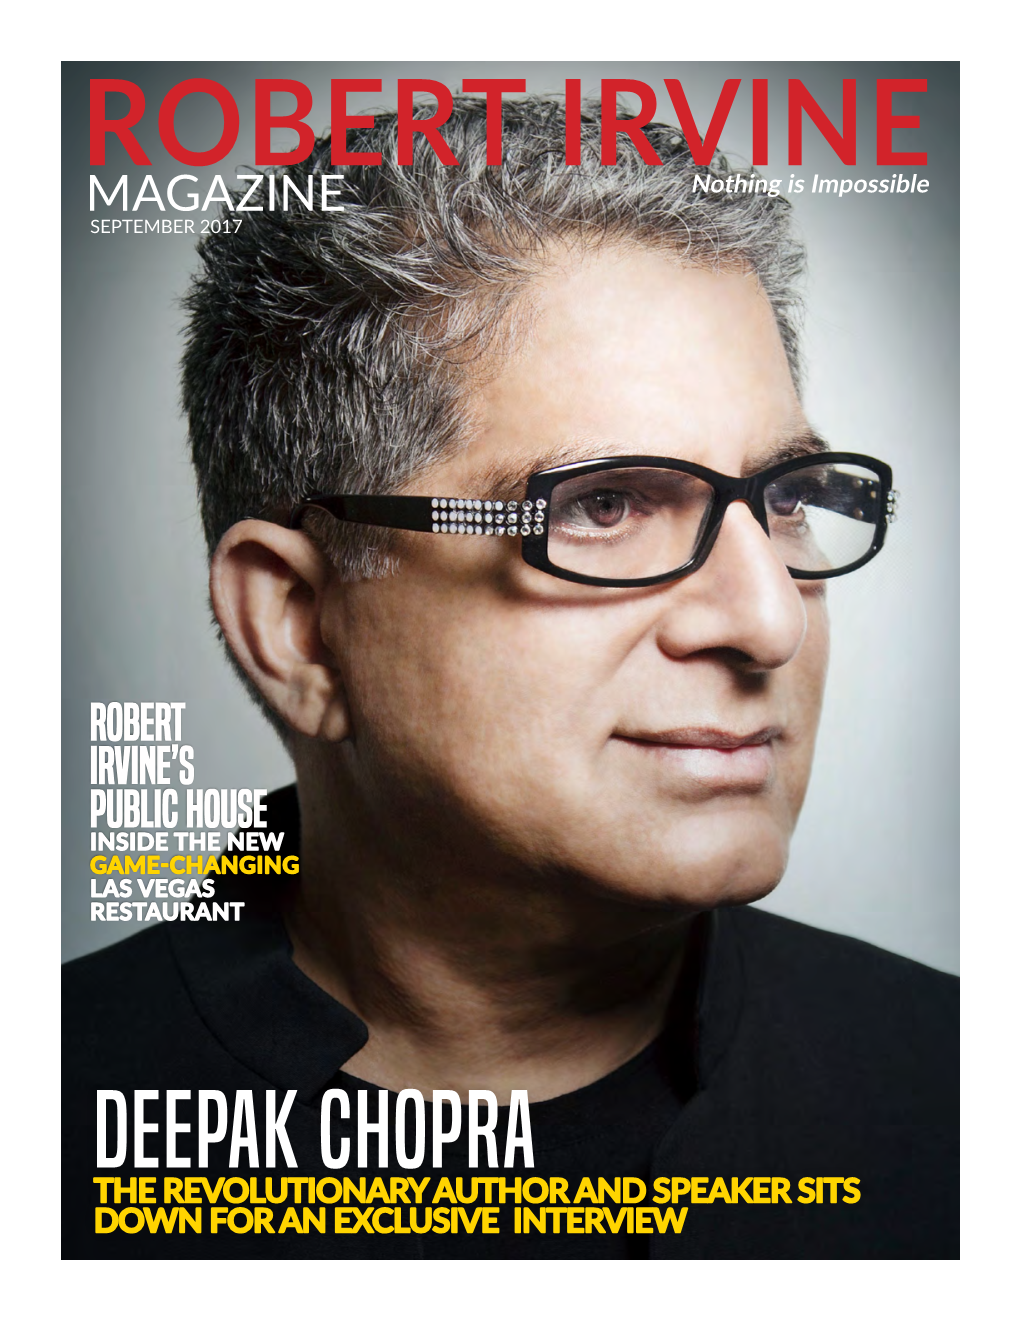 DEEPAK CHOPRA the REVOLUTIONARY AUTHOR and SPEAKER SITS DOWN for an EXCLUSIVE INTERVIEW ROBERT IRVINE MAGAZINE Nothing Is Impossible